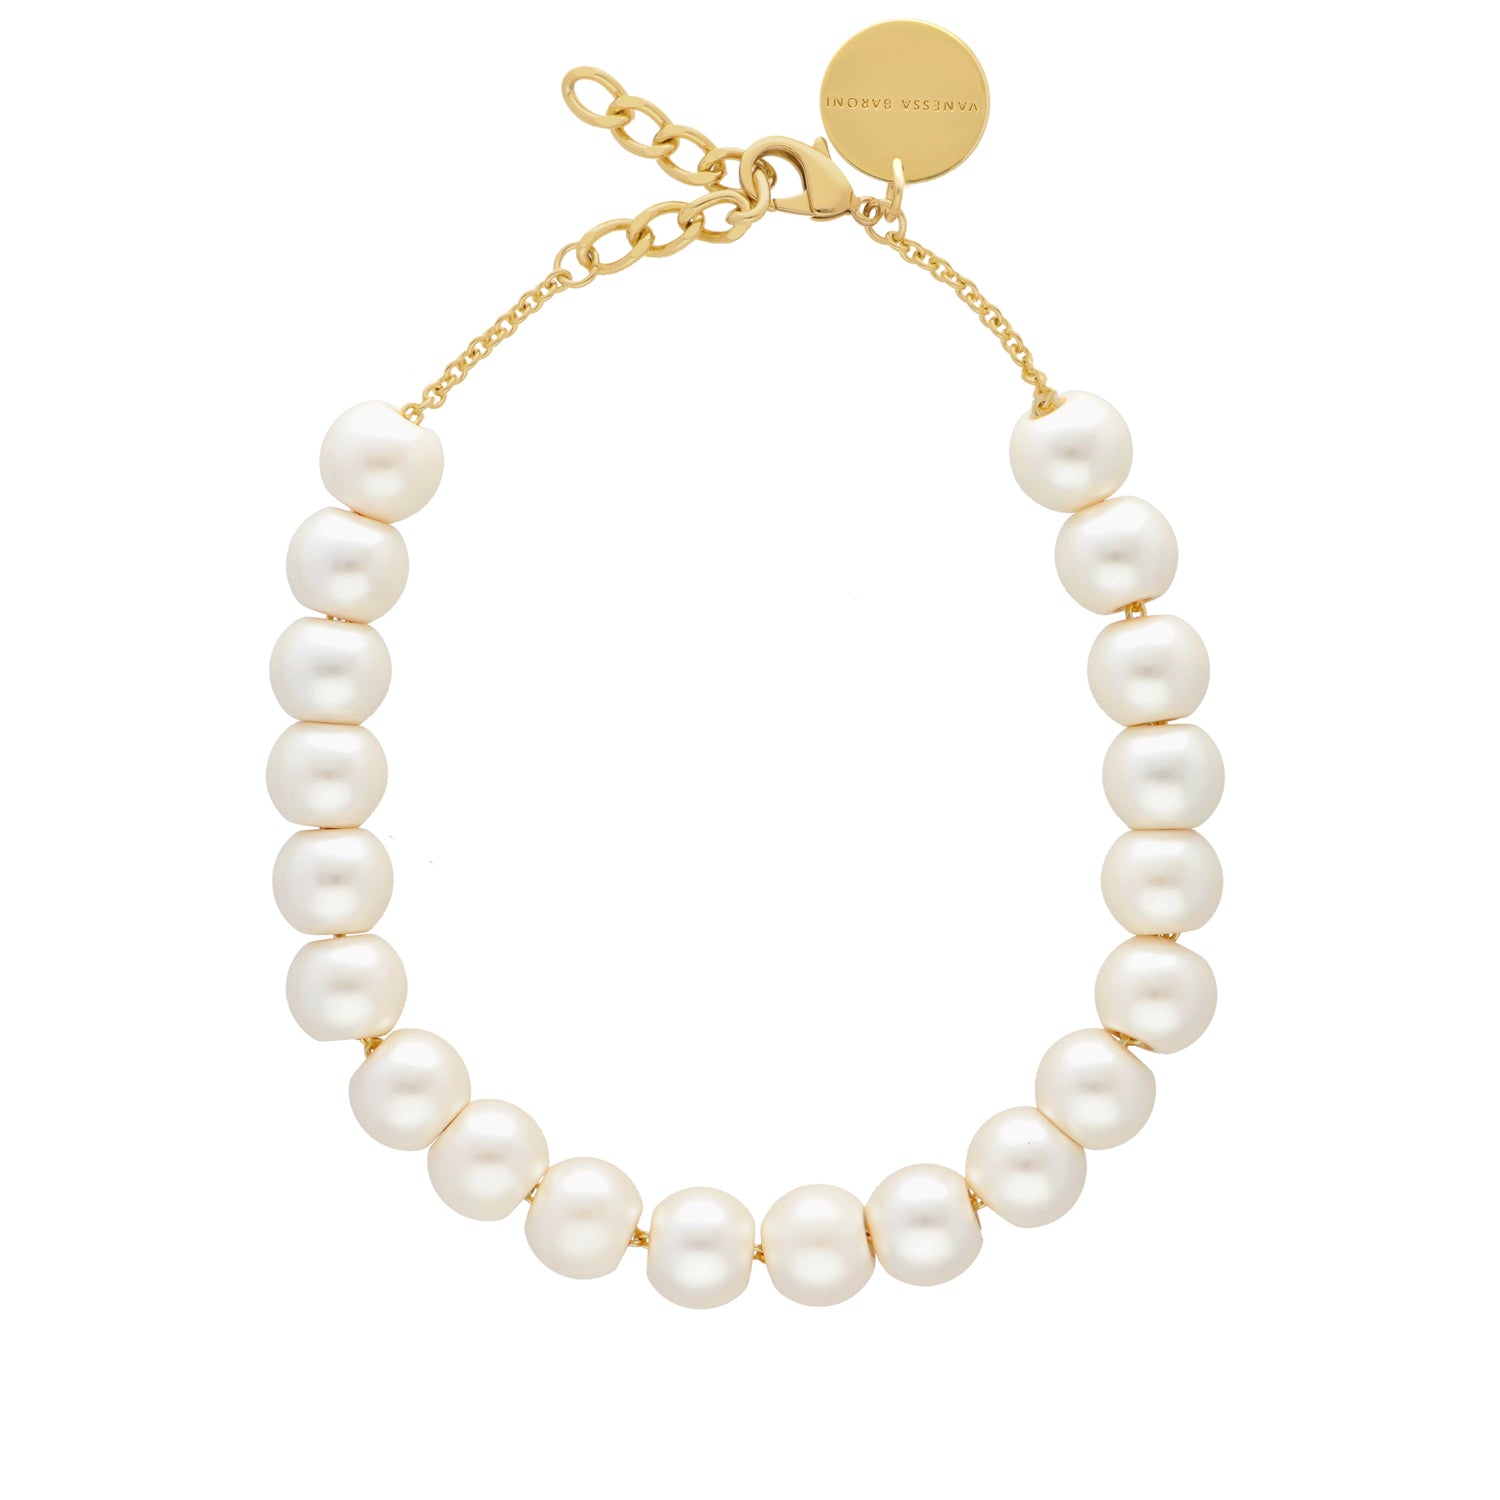 Small Beads Necklace Short Pearl